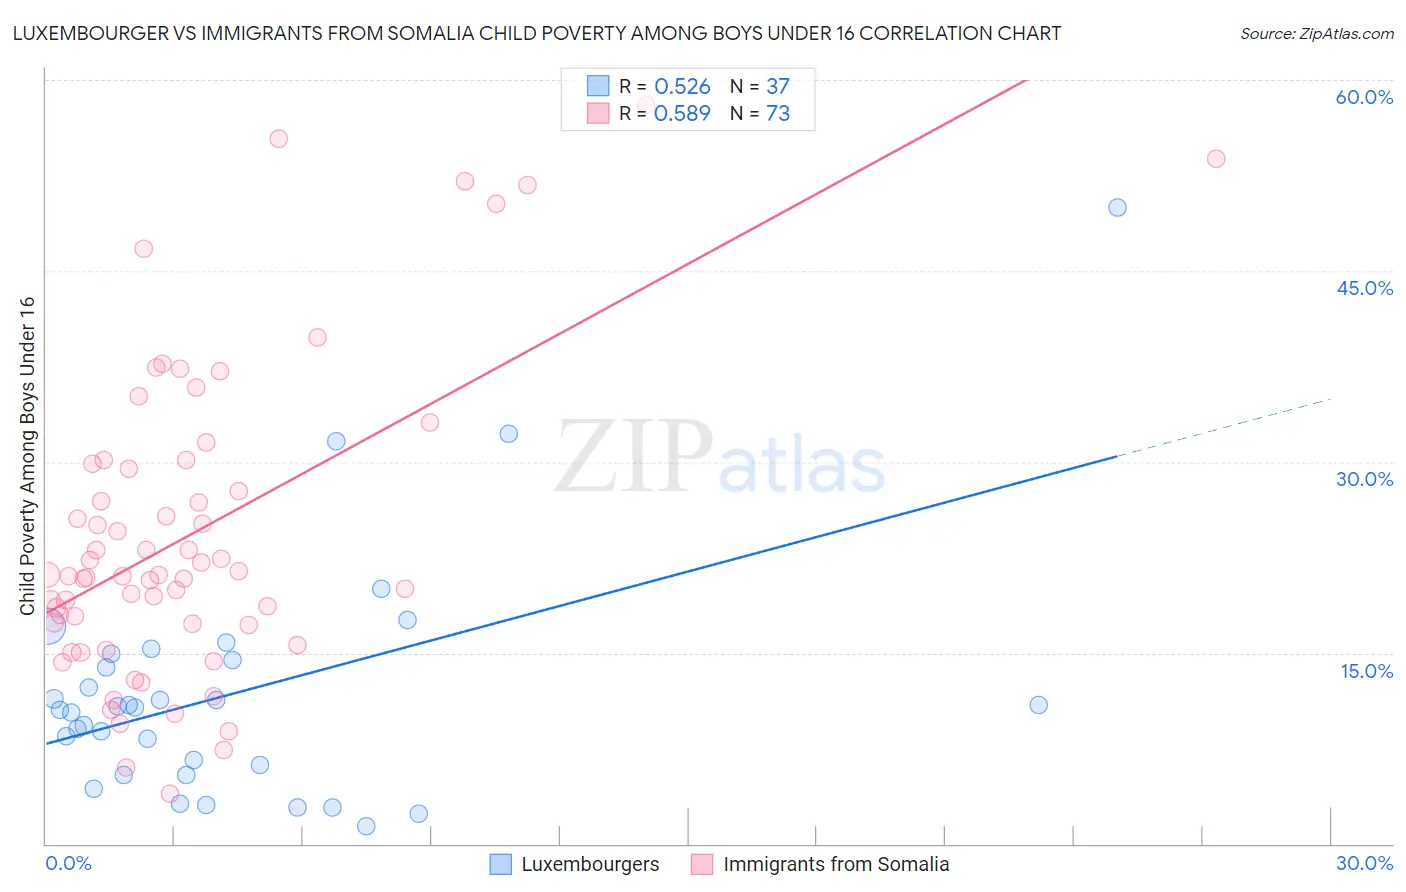 Luxembourger vs Immigrants from Somalia Child Poverty Among Boys Under 16